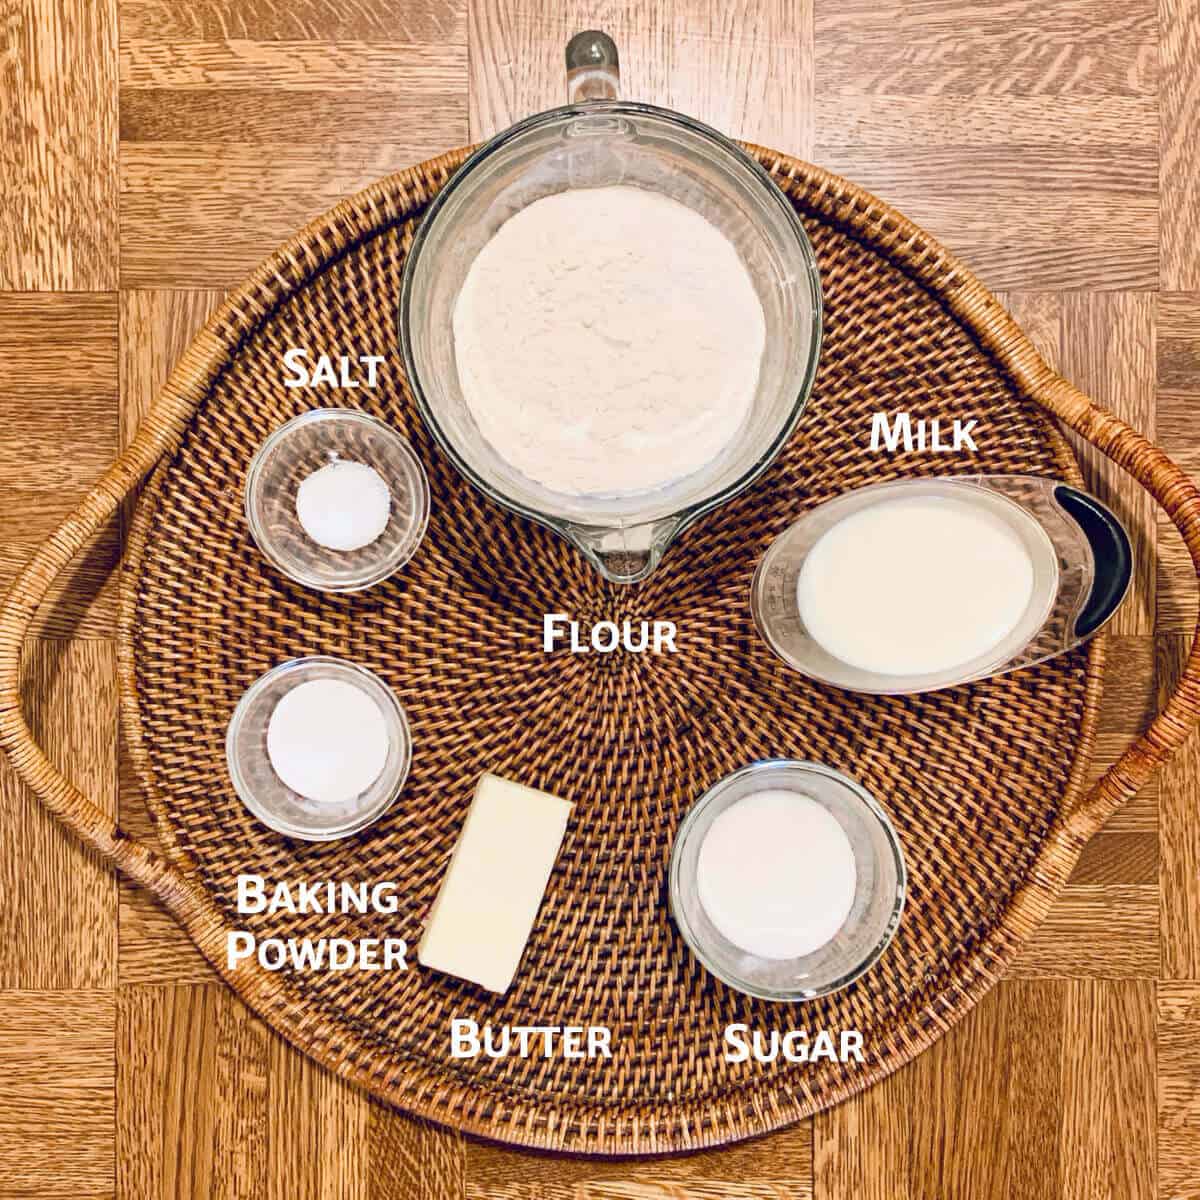 Shortcake biscuit ingredients on a woven tray.